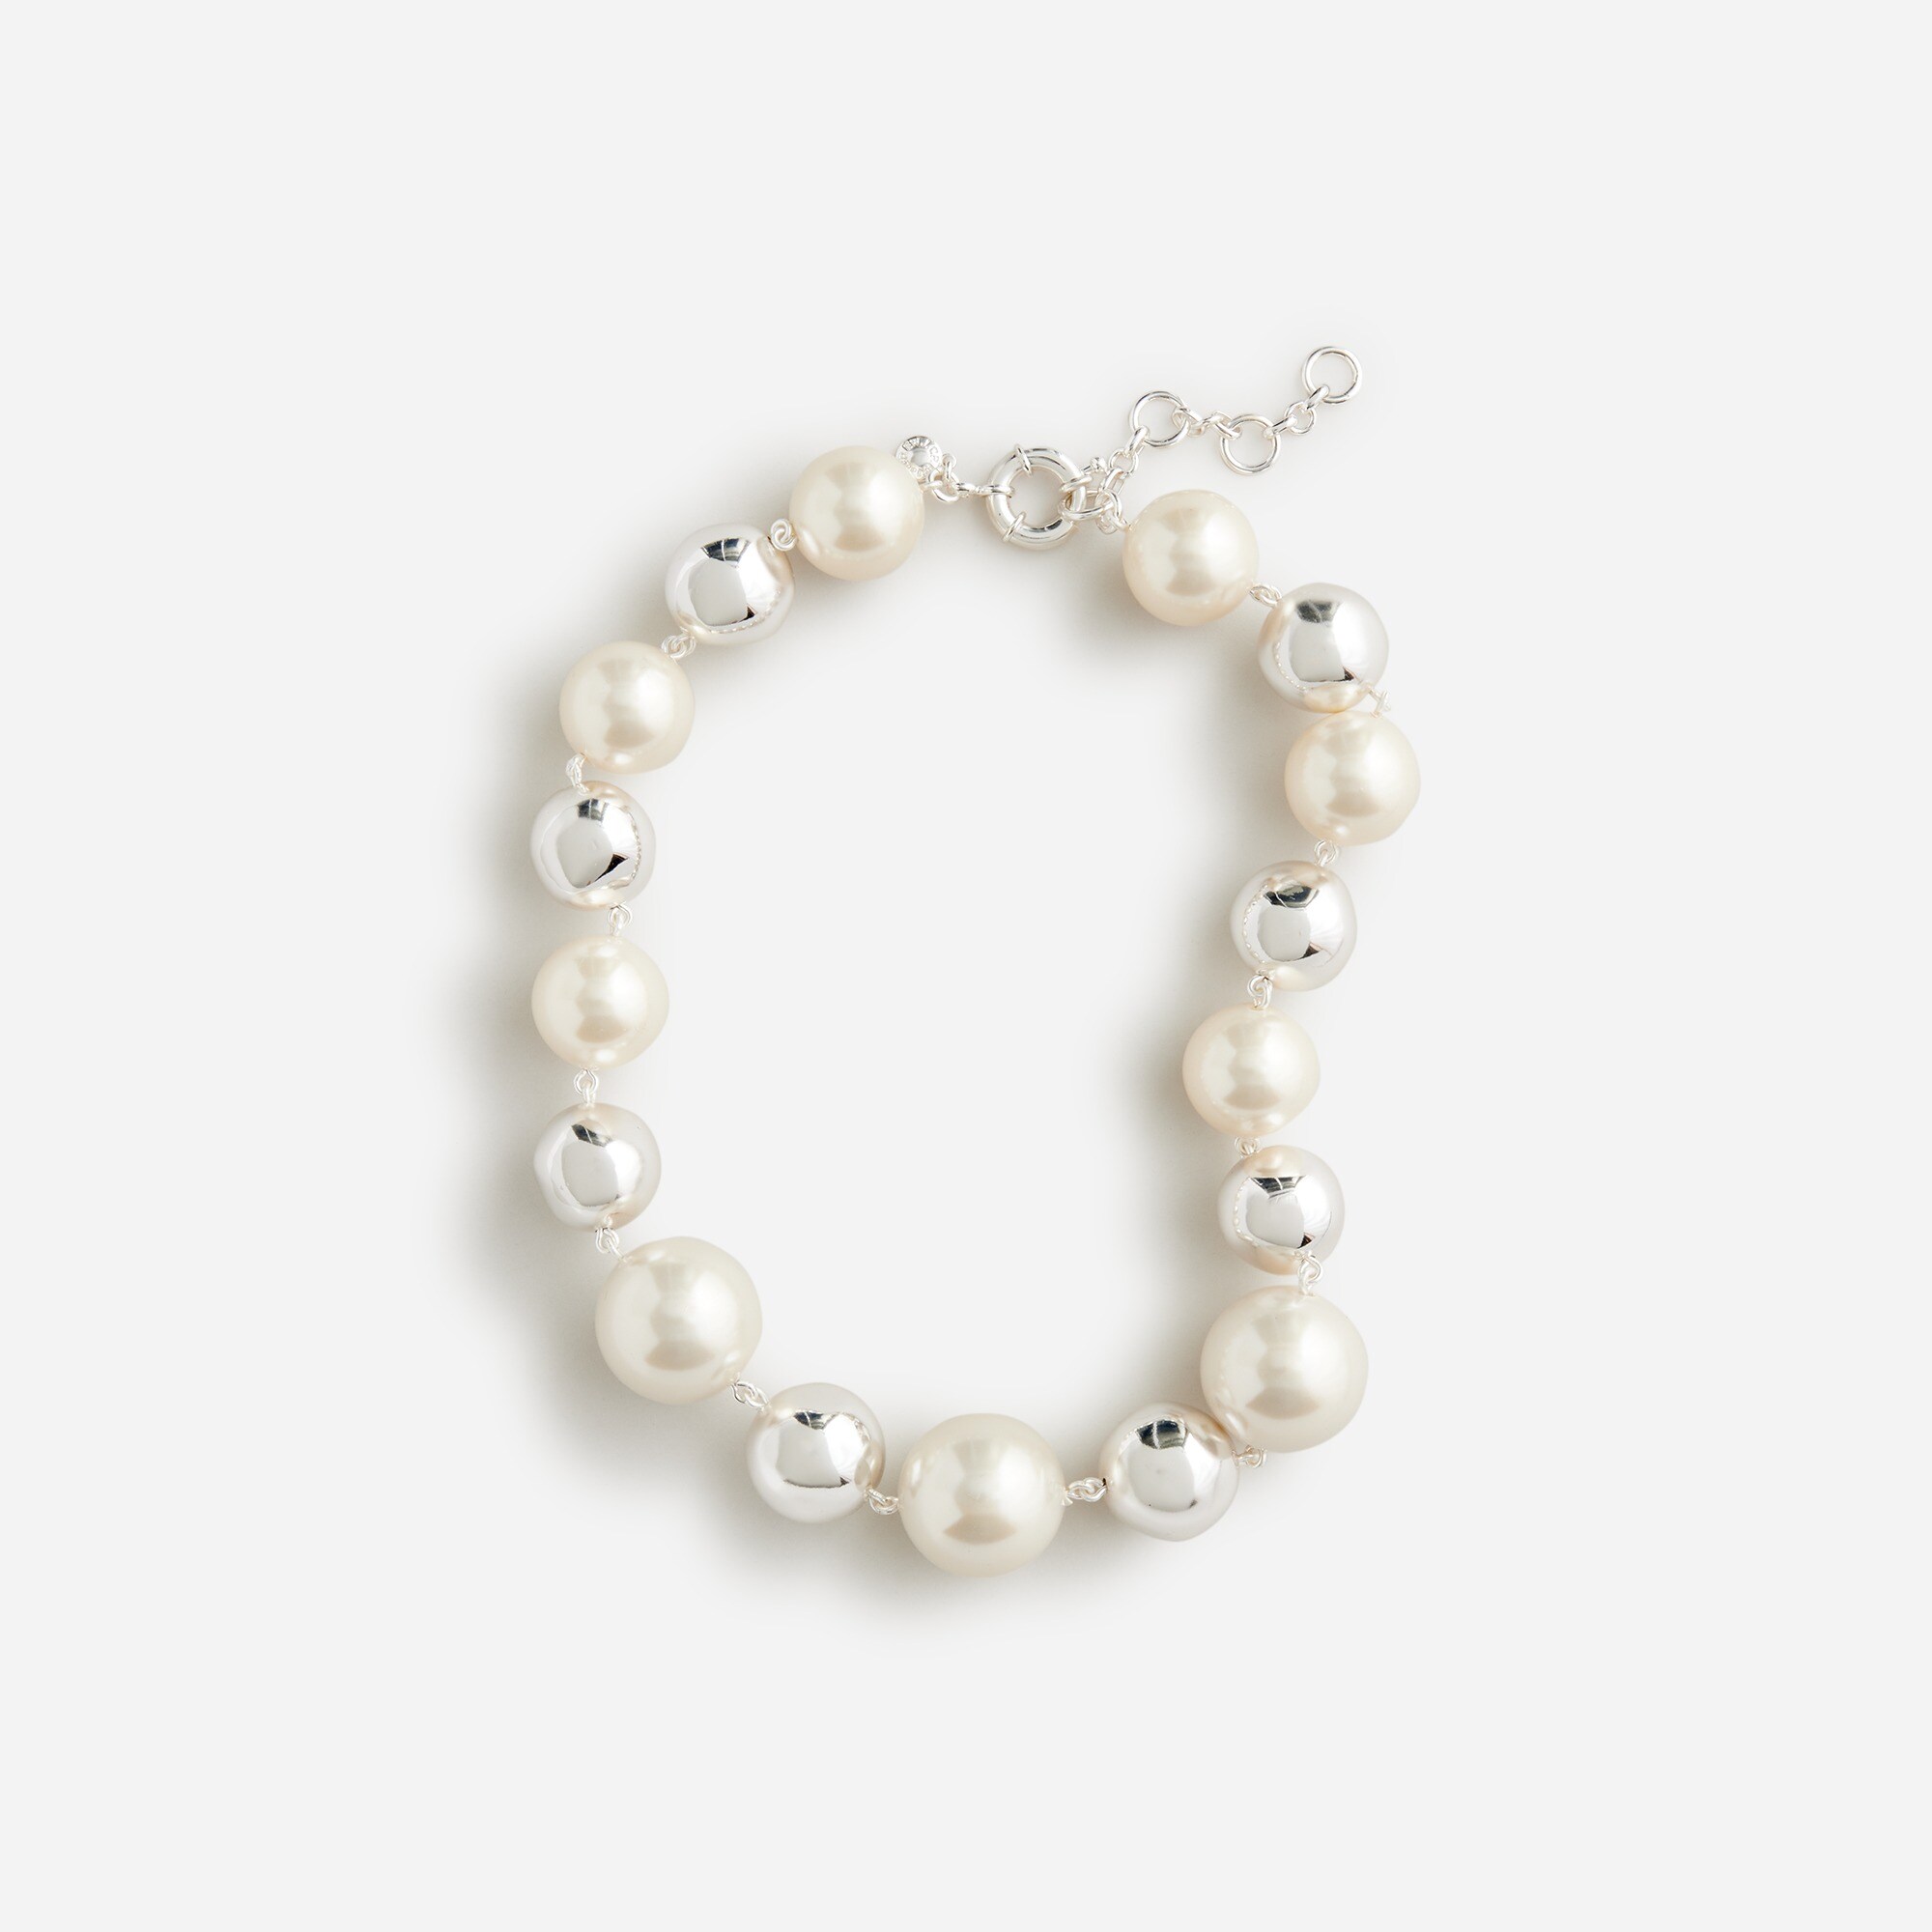  Oversized metallic ball and pearl necklace